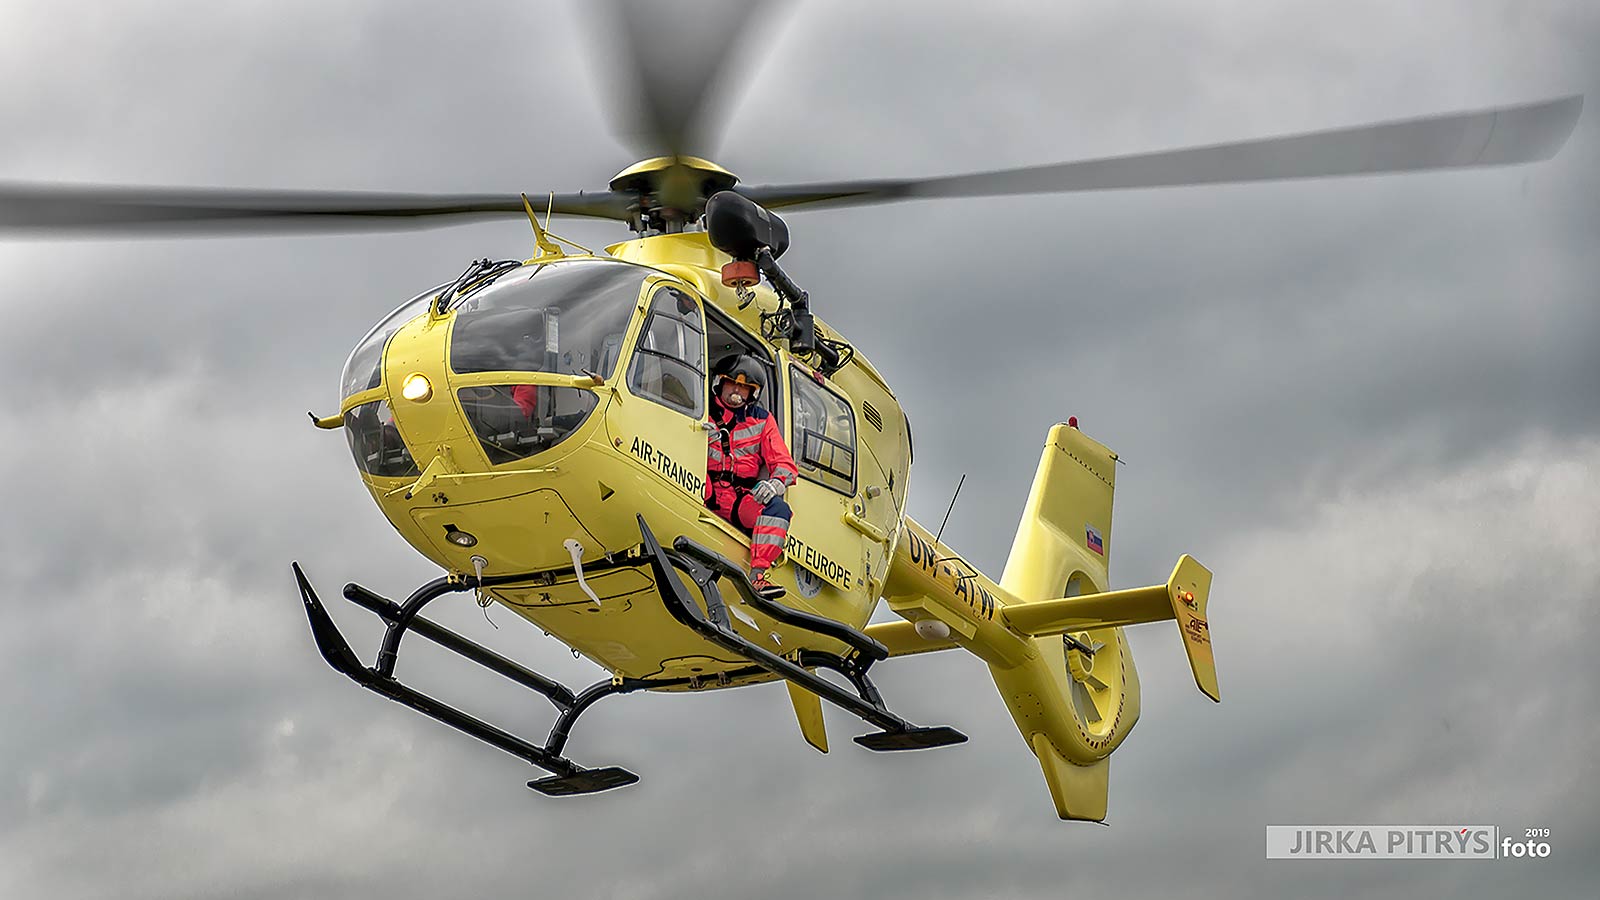 Helicopter EC 135 started its ARS operation at Olomouc.